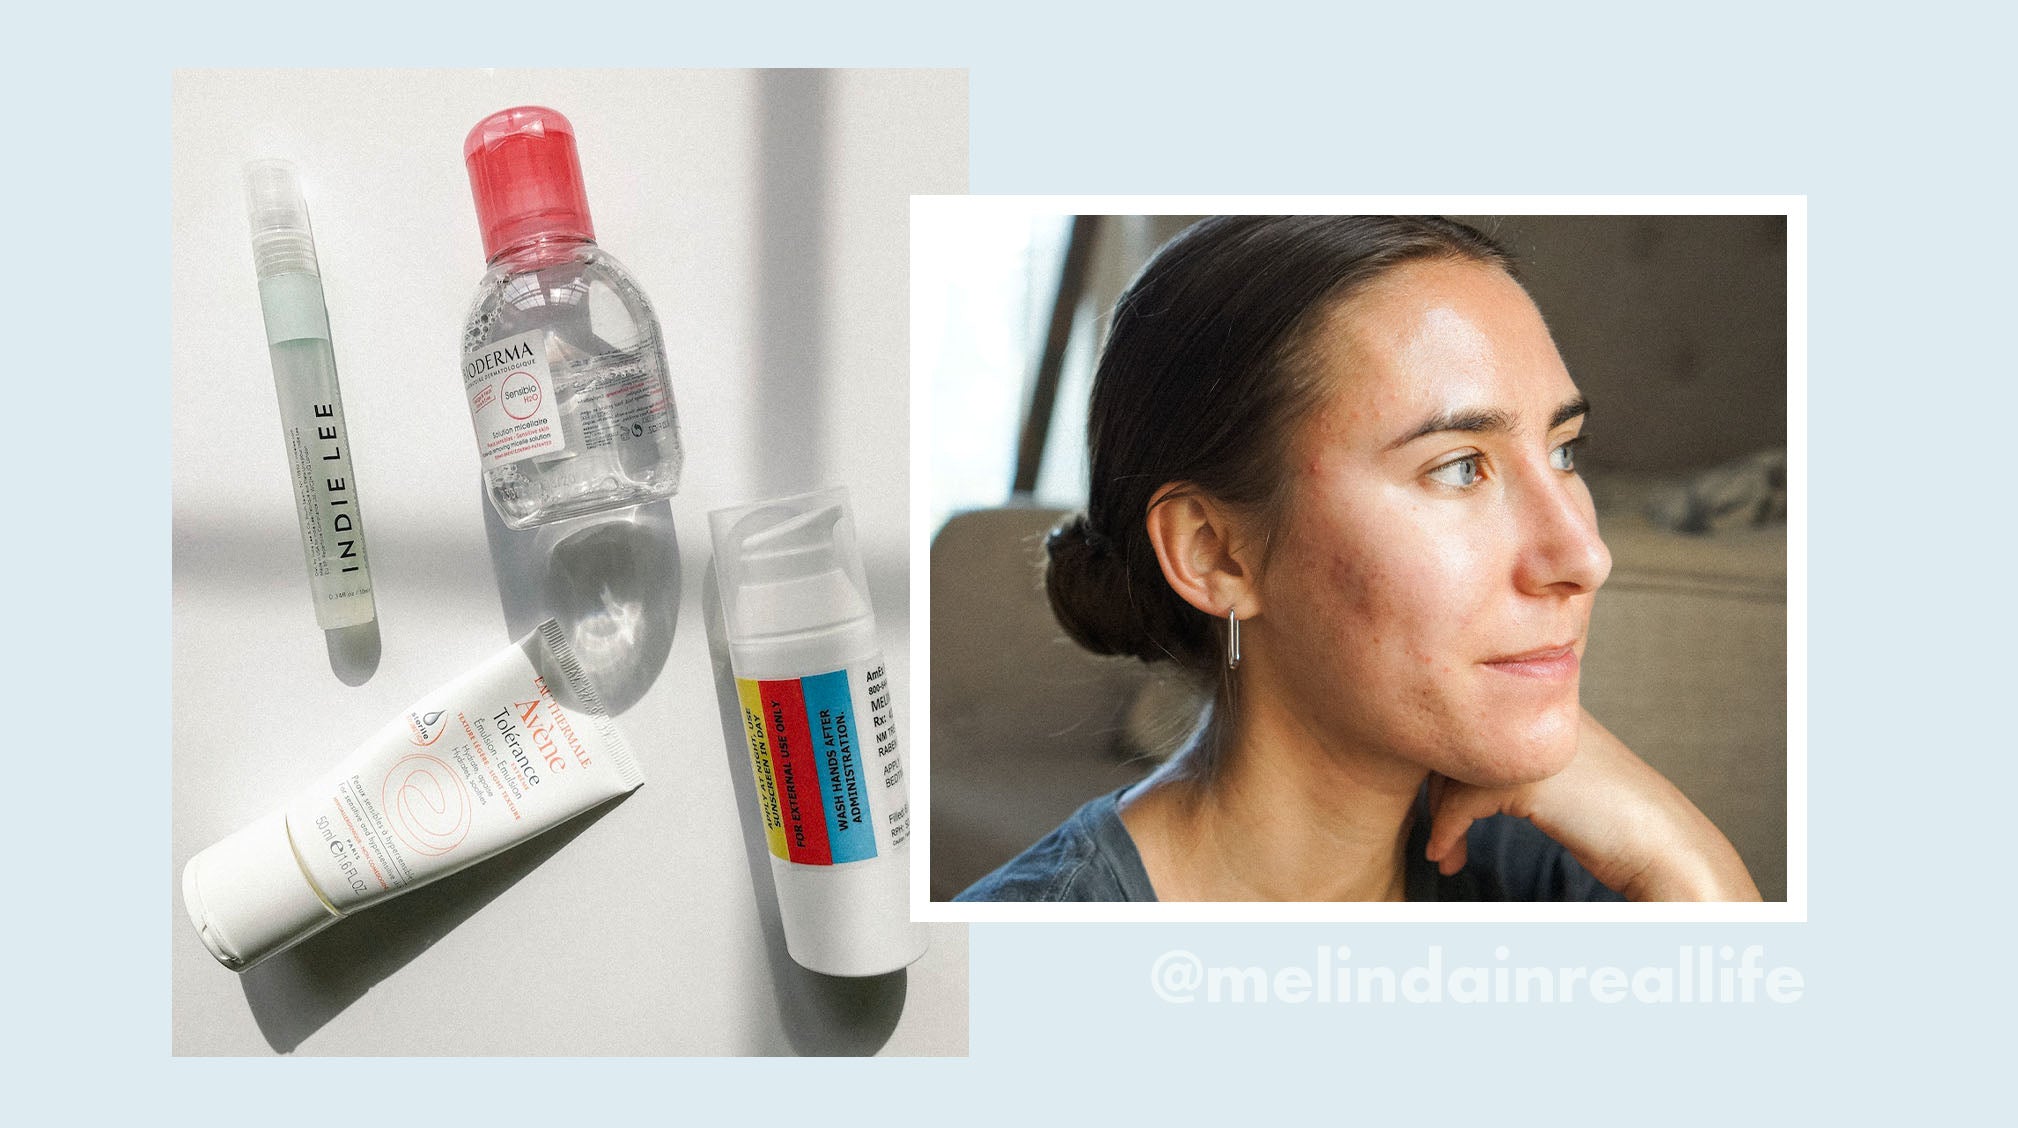 Acne Influencer Melinda Renzoni Shares the Ups and Downs of Her Acne Journey